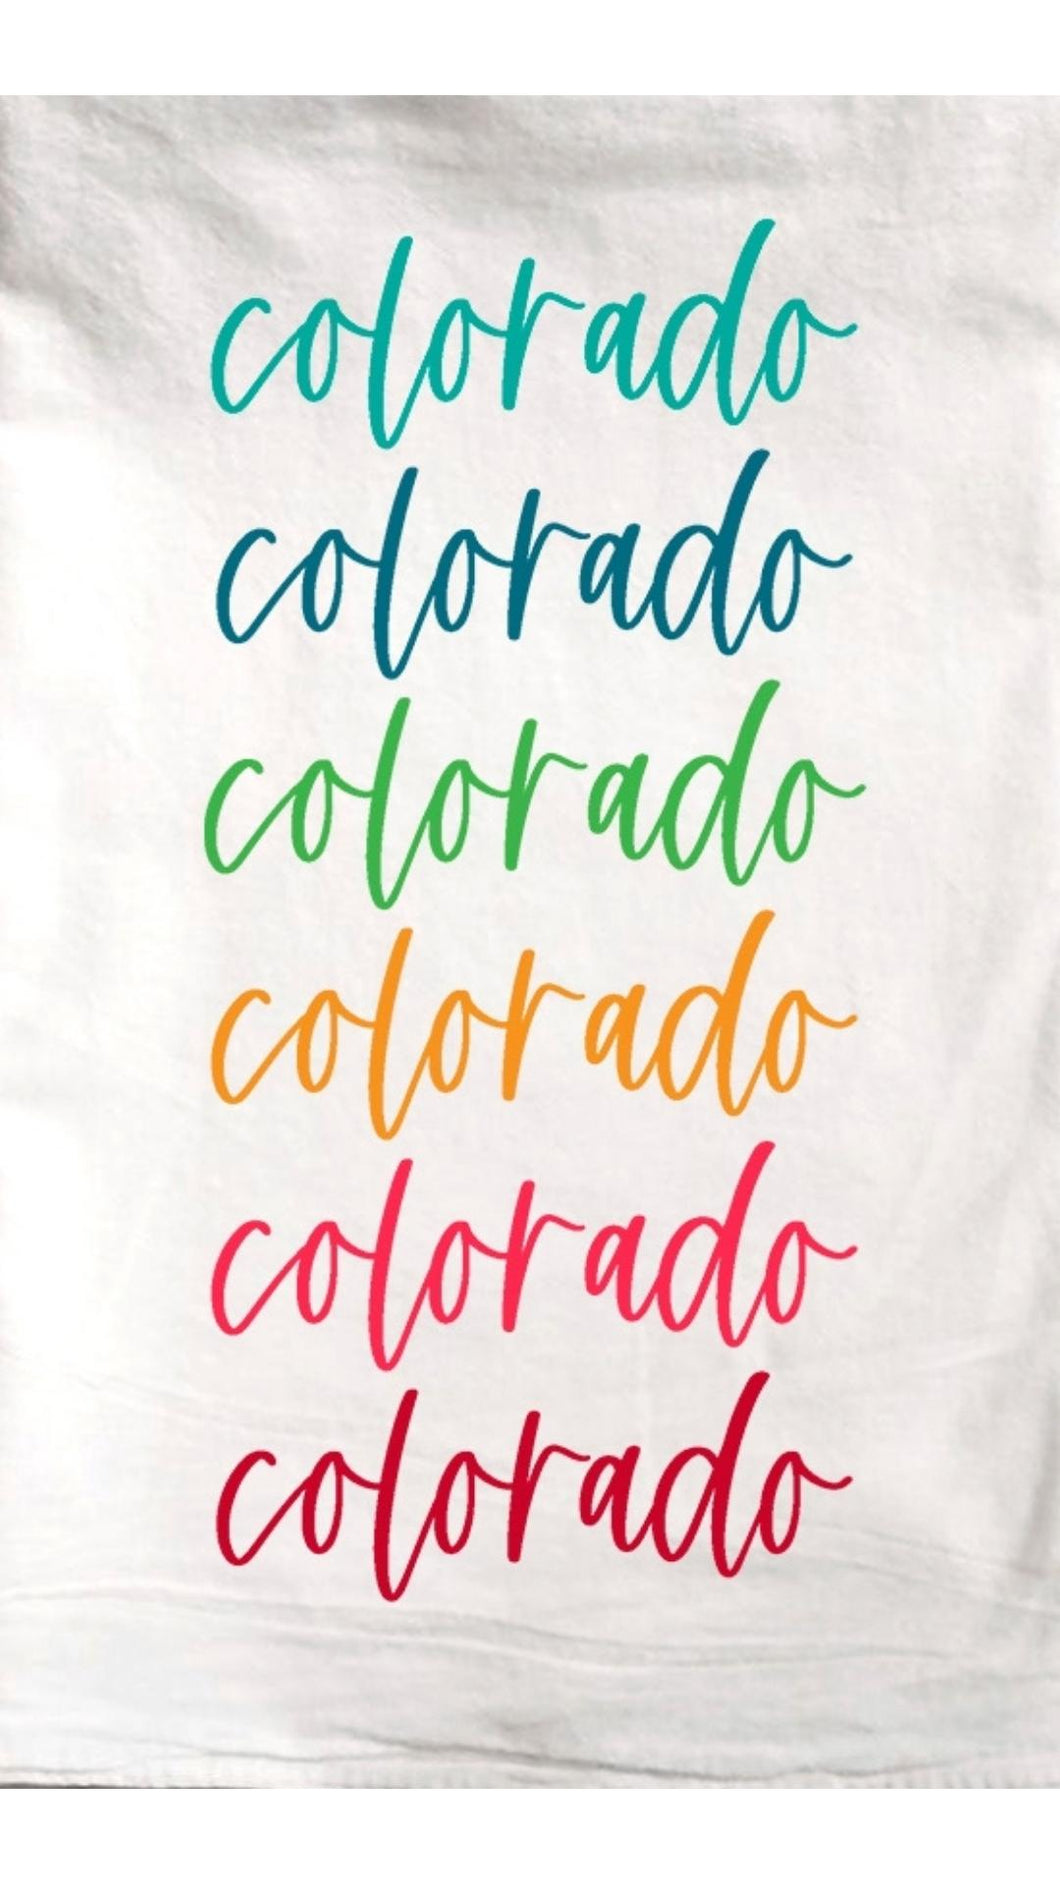 Colorful CO Towel